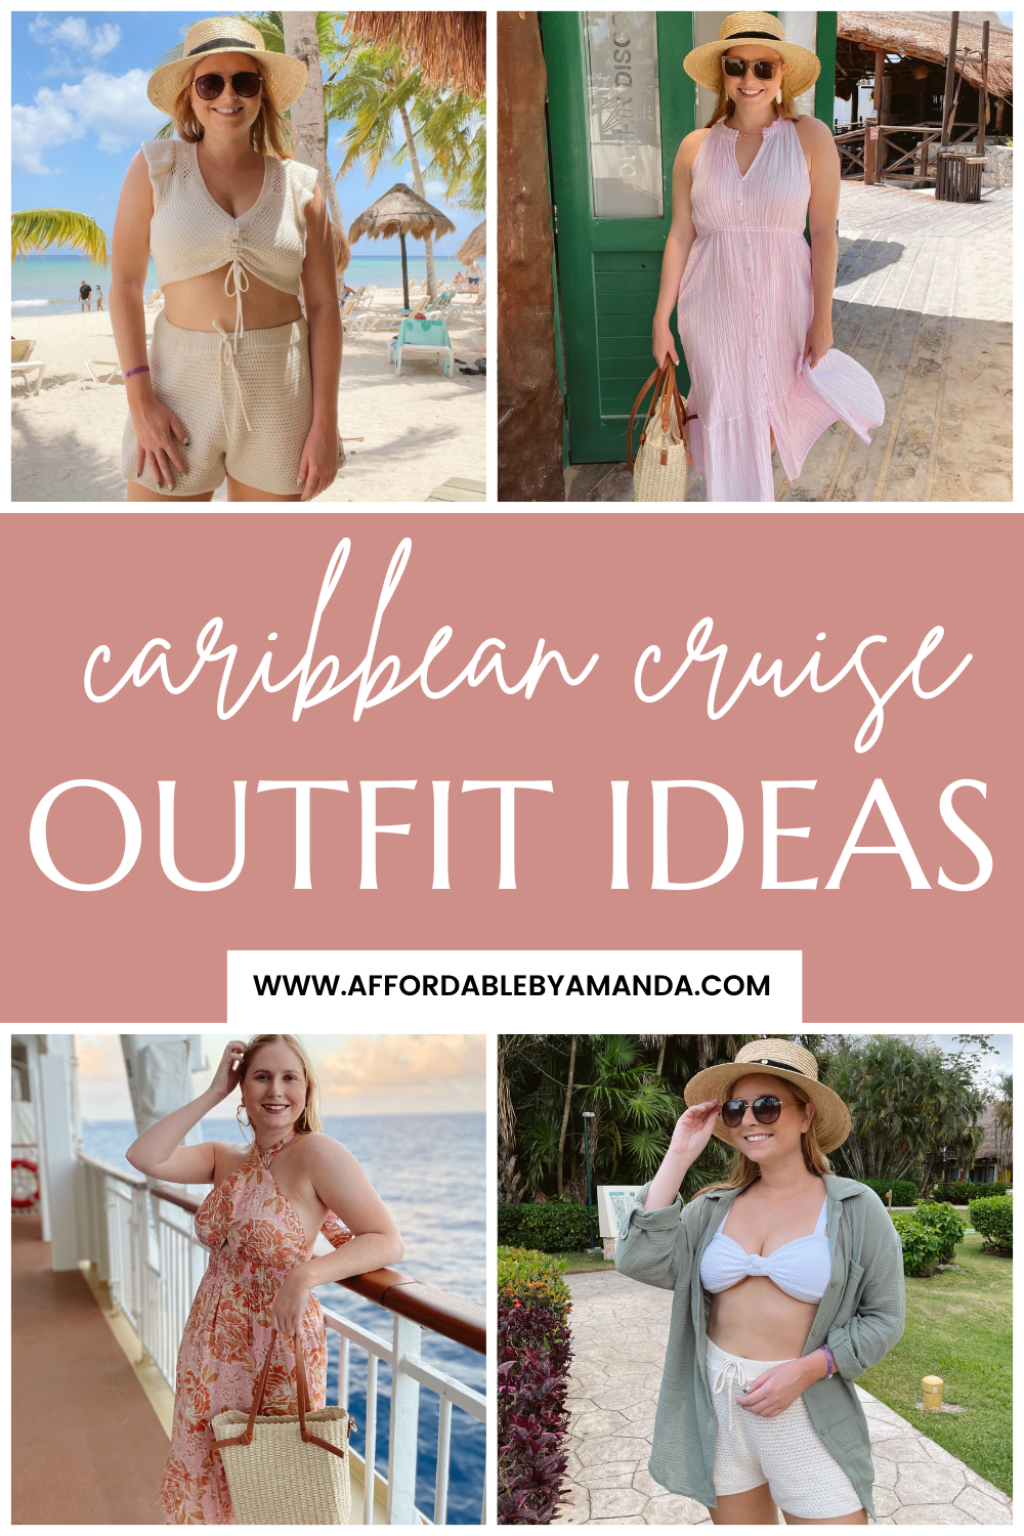 cruise ship outfit ideas - Caribbean Cruise Outfit Ideas  - What Cruising Is Like in